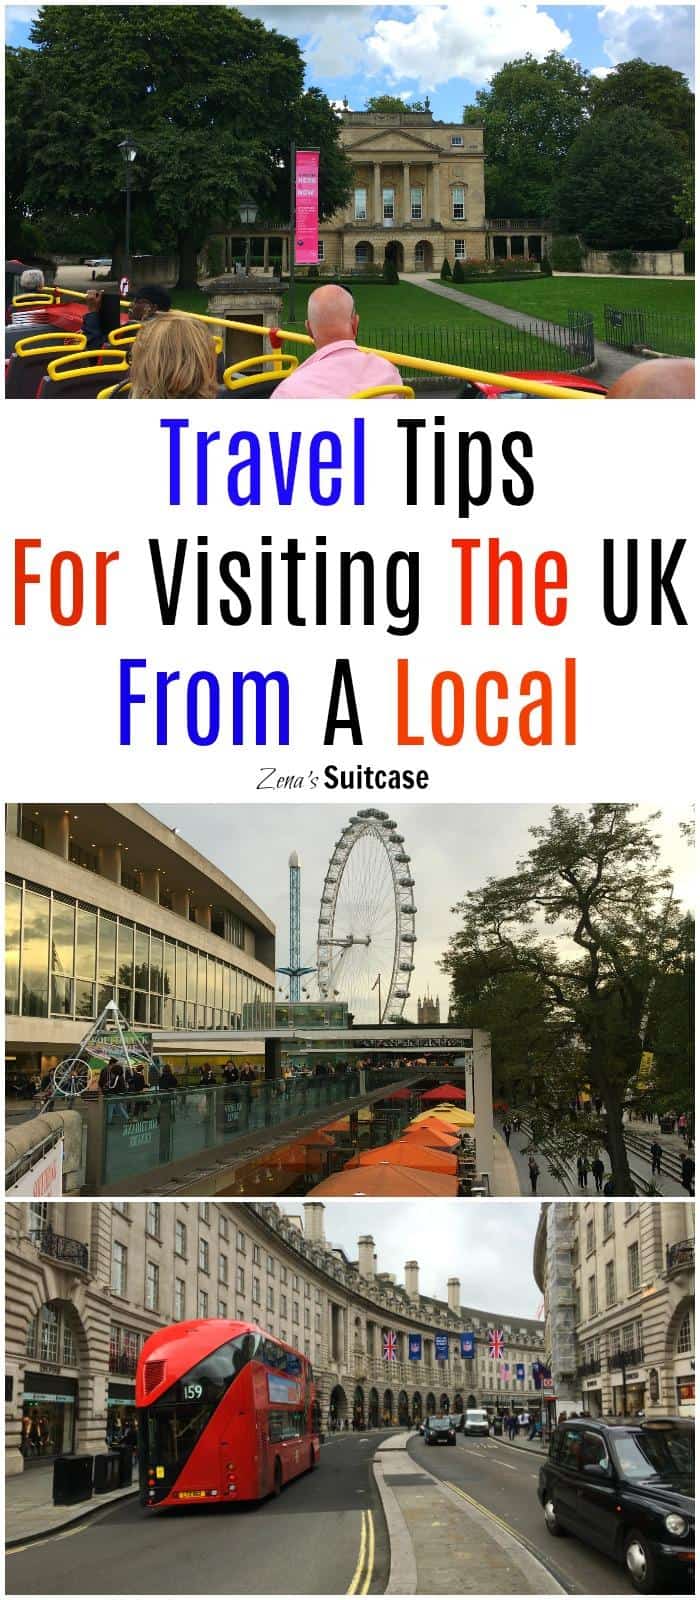 Travel Tips and advice For Visiting The UK From A Local